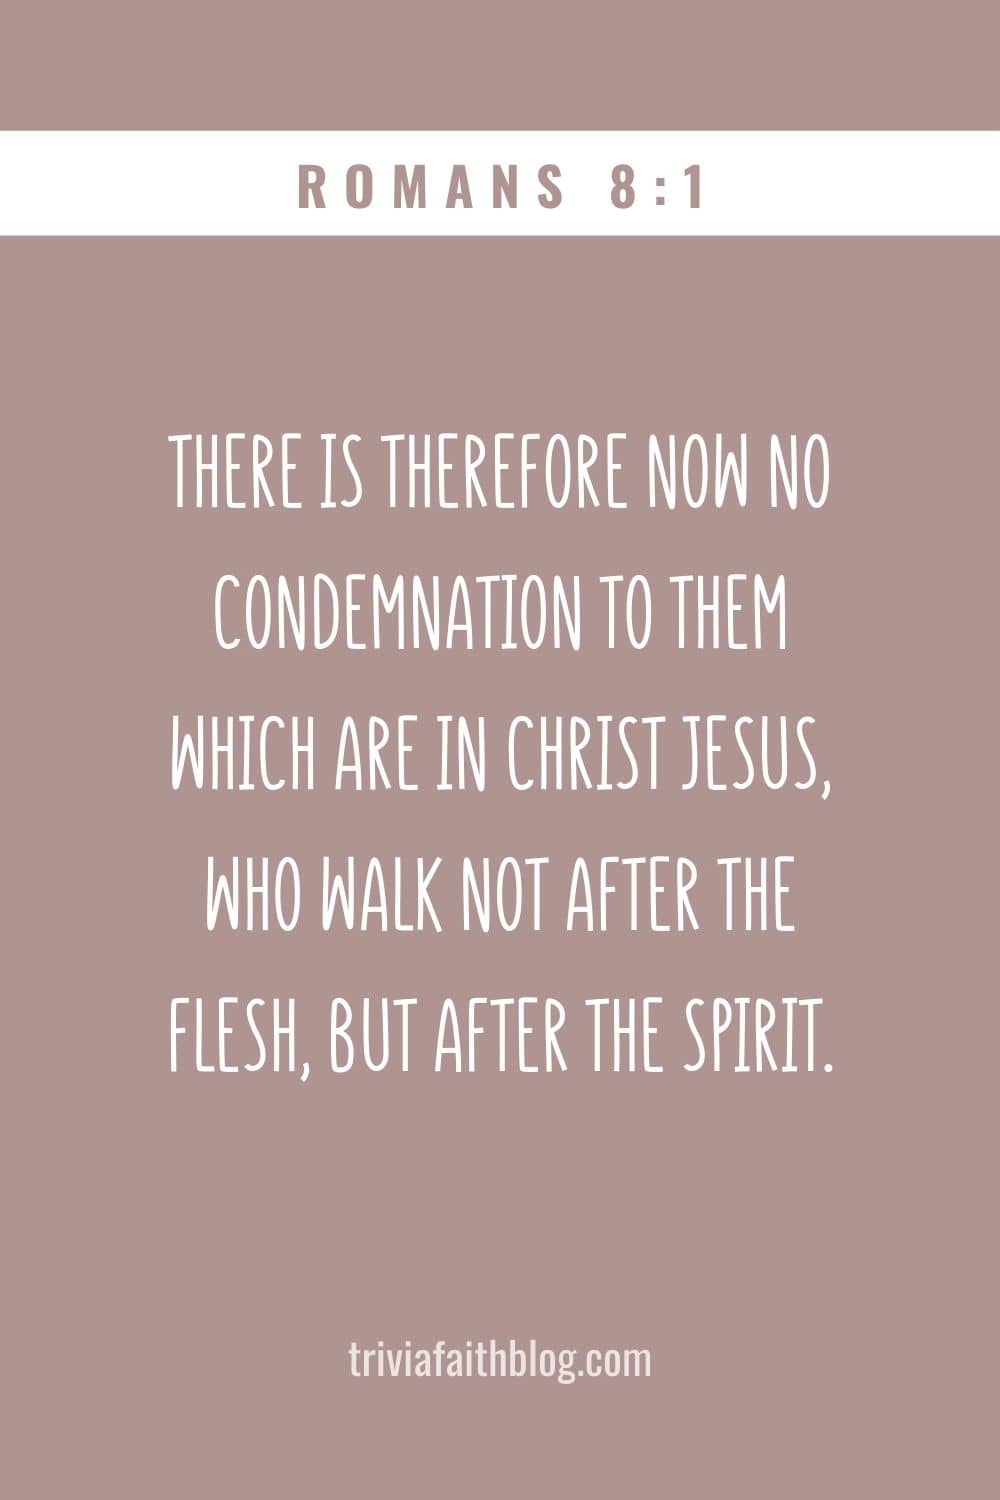 There is therefore now no condemnation to them which are in Christ Jesus, who walk not after the flesh, but after the Spirit